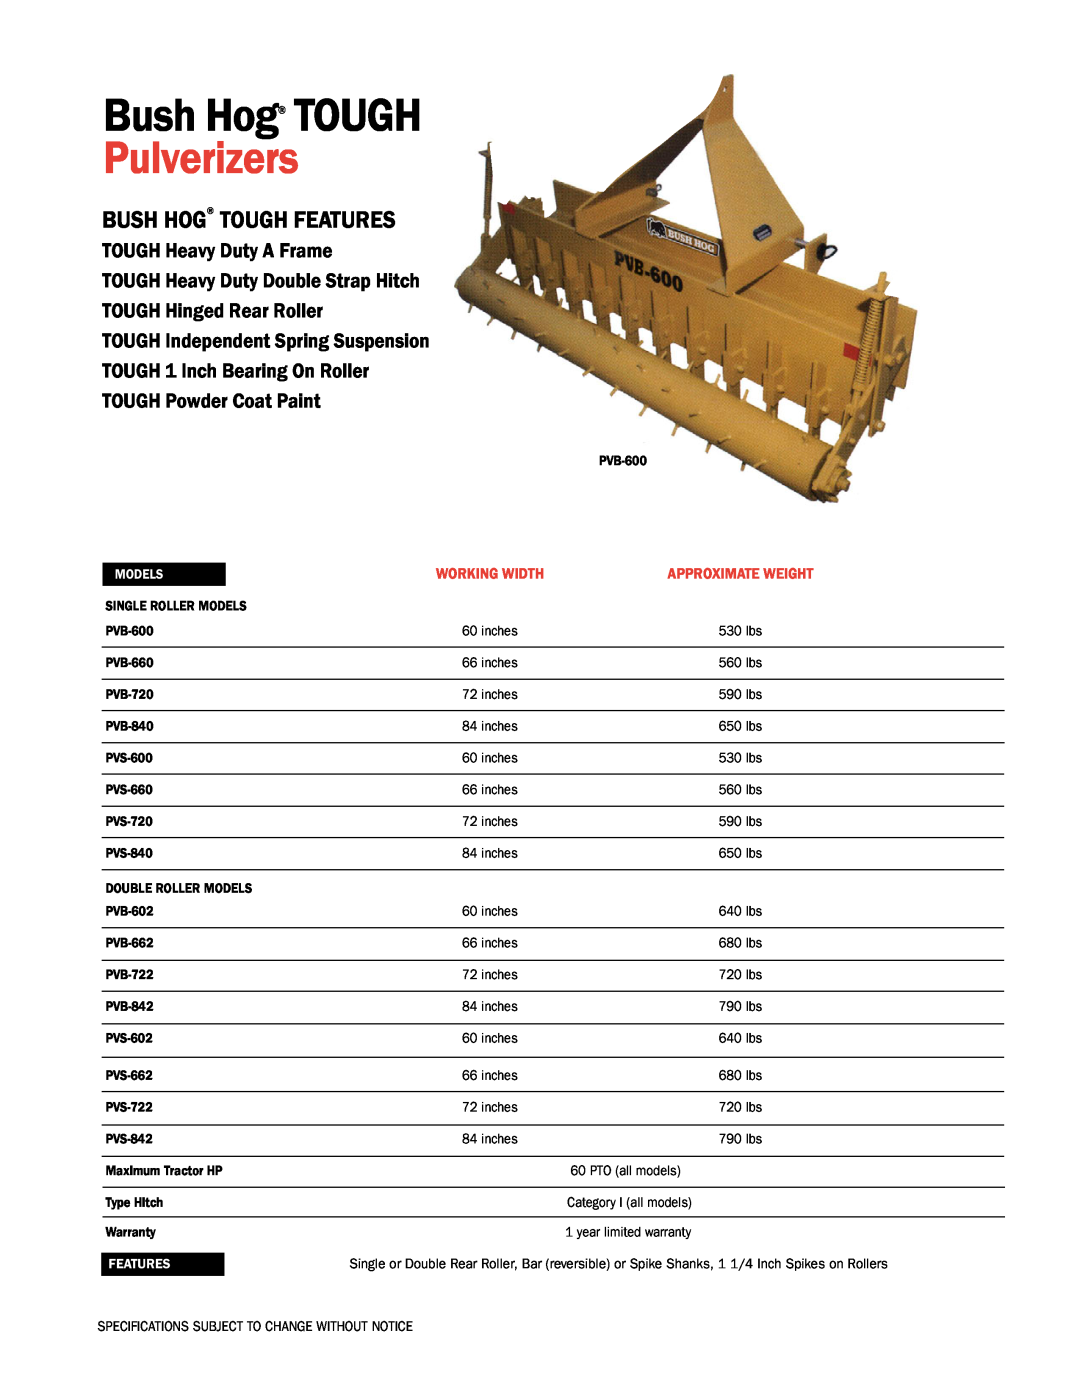 Bush Hog PVB-602 specifications Pulverizers, Bush Hog TOUGH Features, TOUGH Heavy Duty A Frame, Working Width, Models 